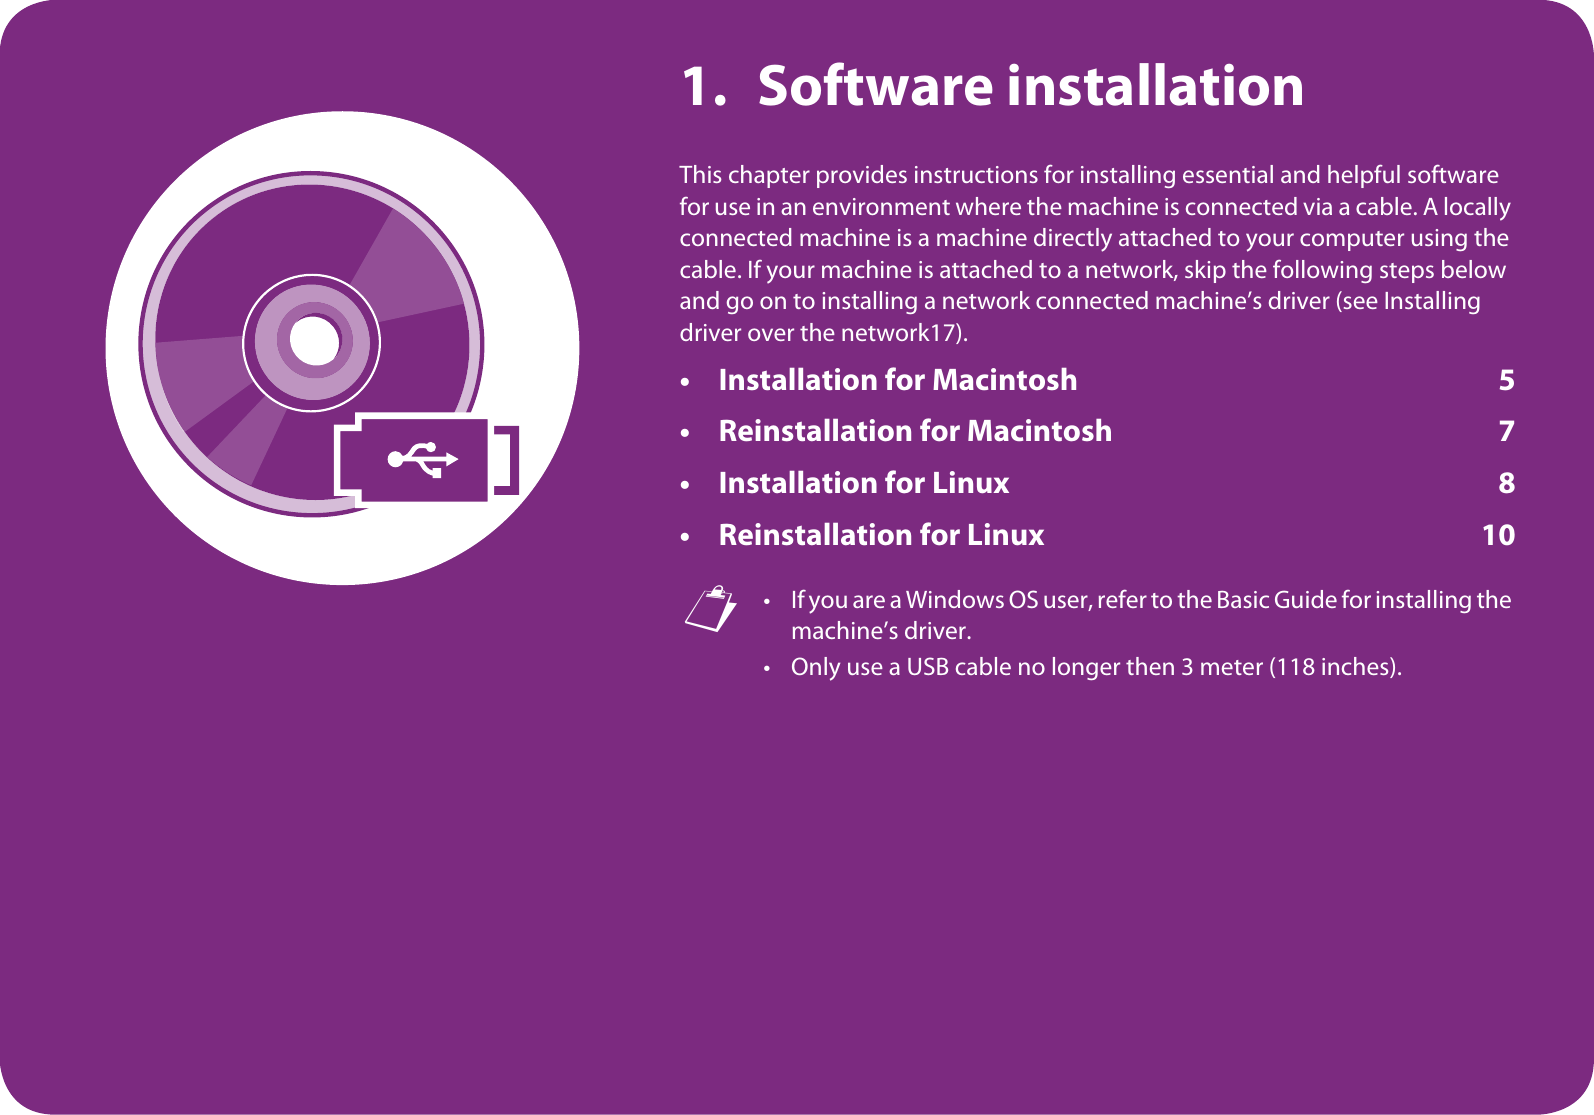 1. Software installationThis chapter provides instructions for installing essential and helpful software for use in an environment where the machine is connected via a cable. A locally connected machine is a machine directly attached to your computer using the cable. If your machine is attached to a network, skip the following steps below and go on to installing a network connected machine’s driver (see Installing driver over the network17).• Installation for Macintosh 5• Reinstallation for Macintosh 7• Installation for Linux 8• Reinstallation for Linux 10 • If you are a Windows OS user, refer to the Basic Guide for installing the machine’s driver.• Only use a USB cable no longer then 3 meter (118 inches).